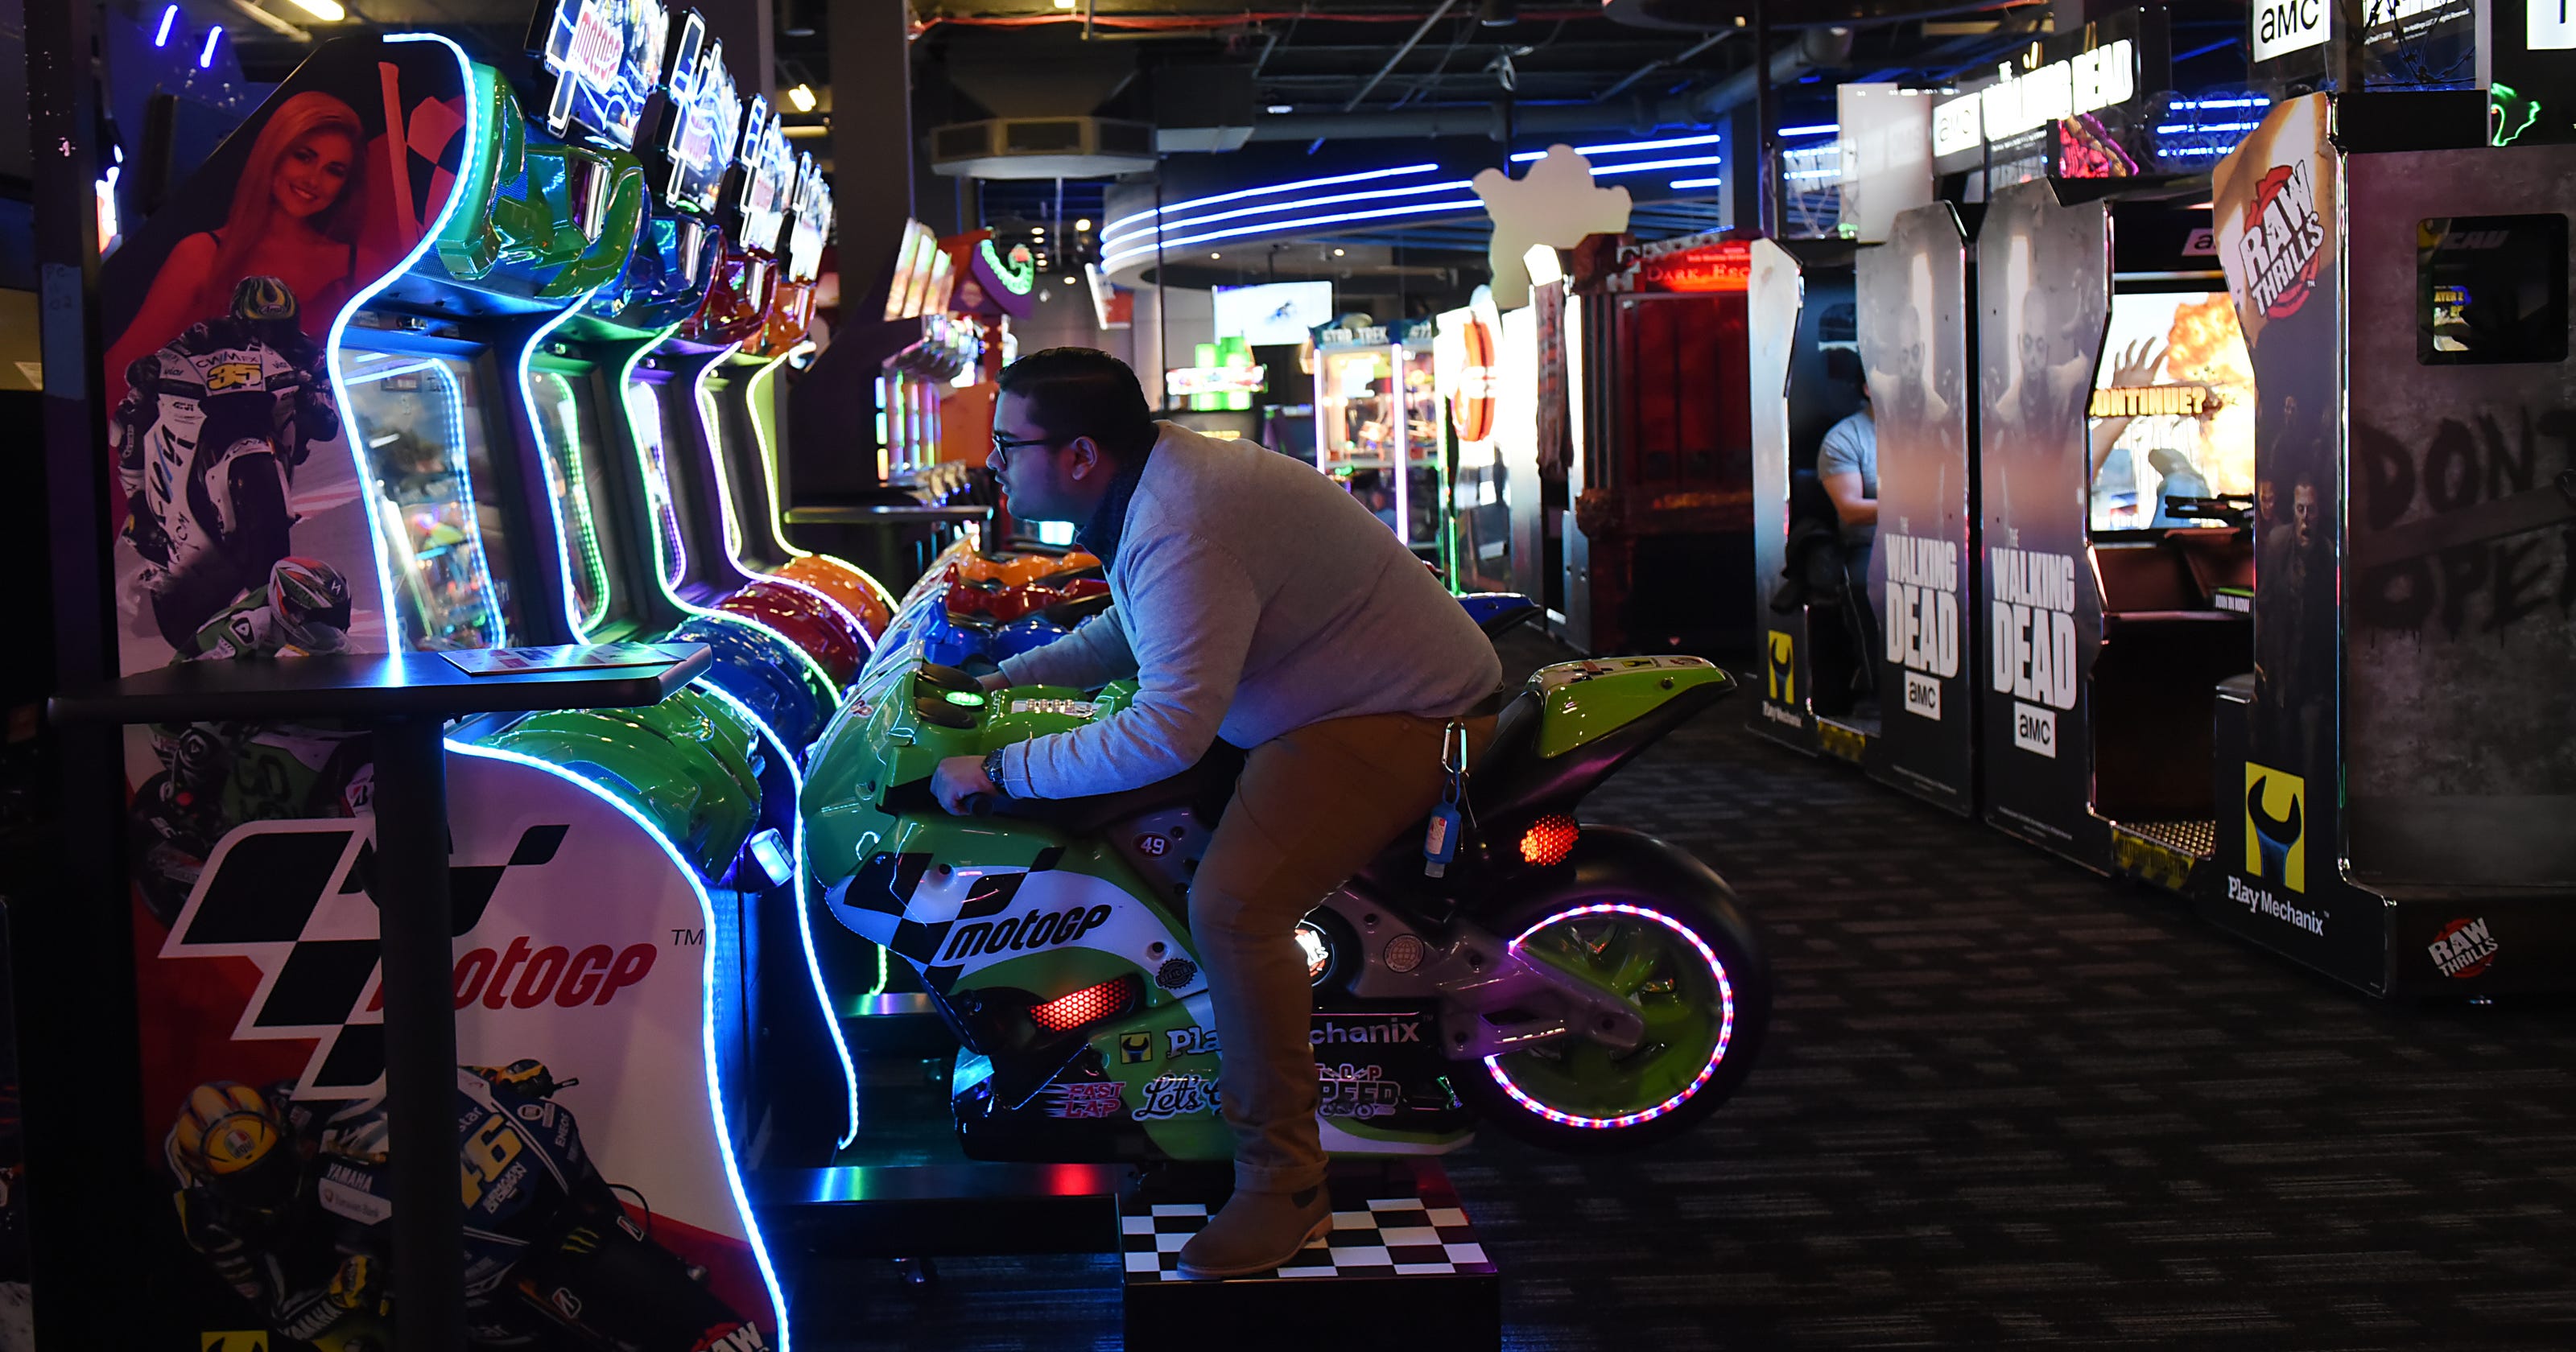 Is Dave & Buster's eyeing Jordan Creek for its first Iowa arcade?